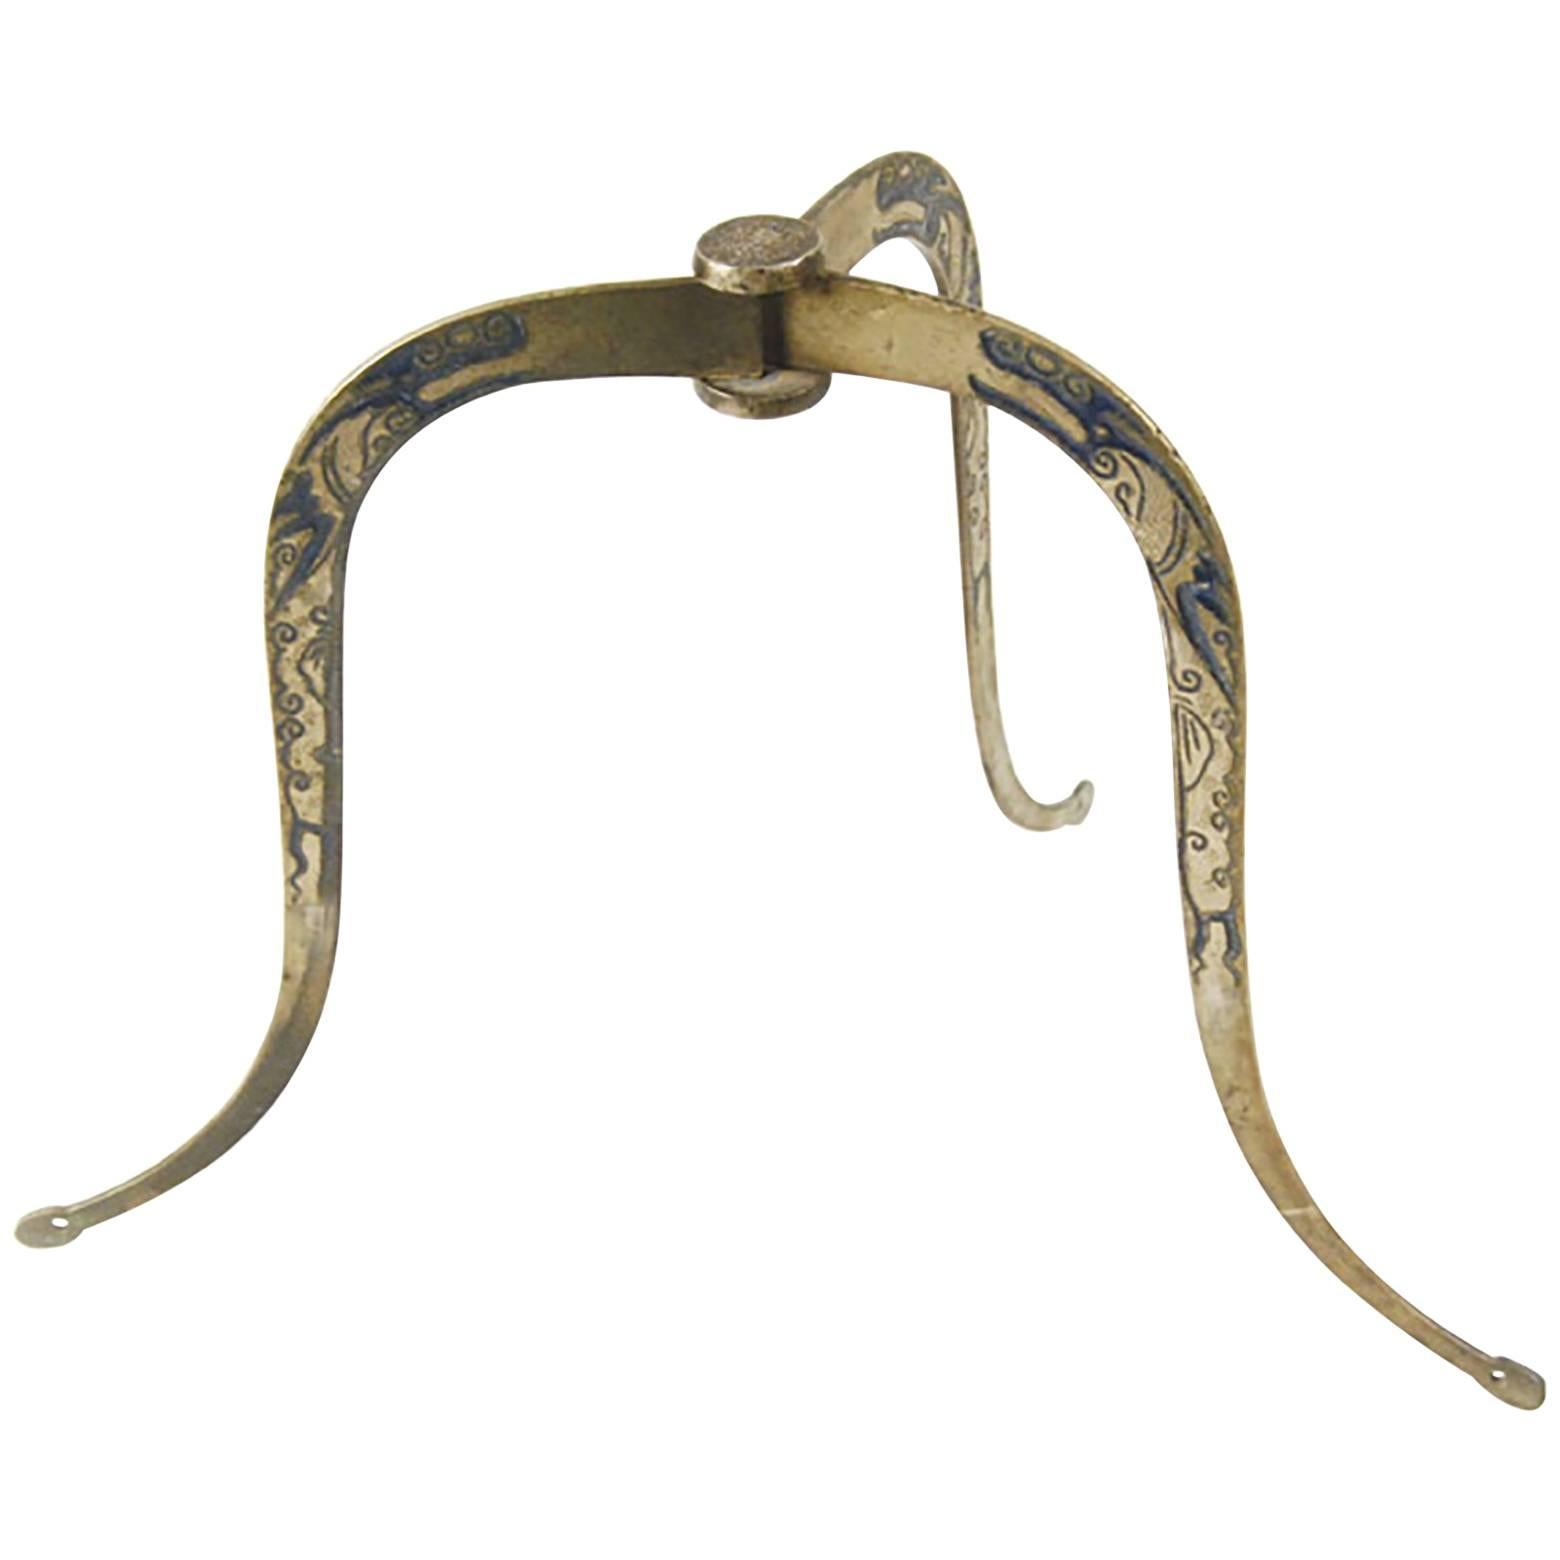 Chinese Baitong Etched Brass Folding Hat Stand, c. 1850